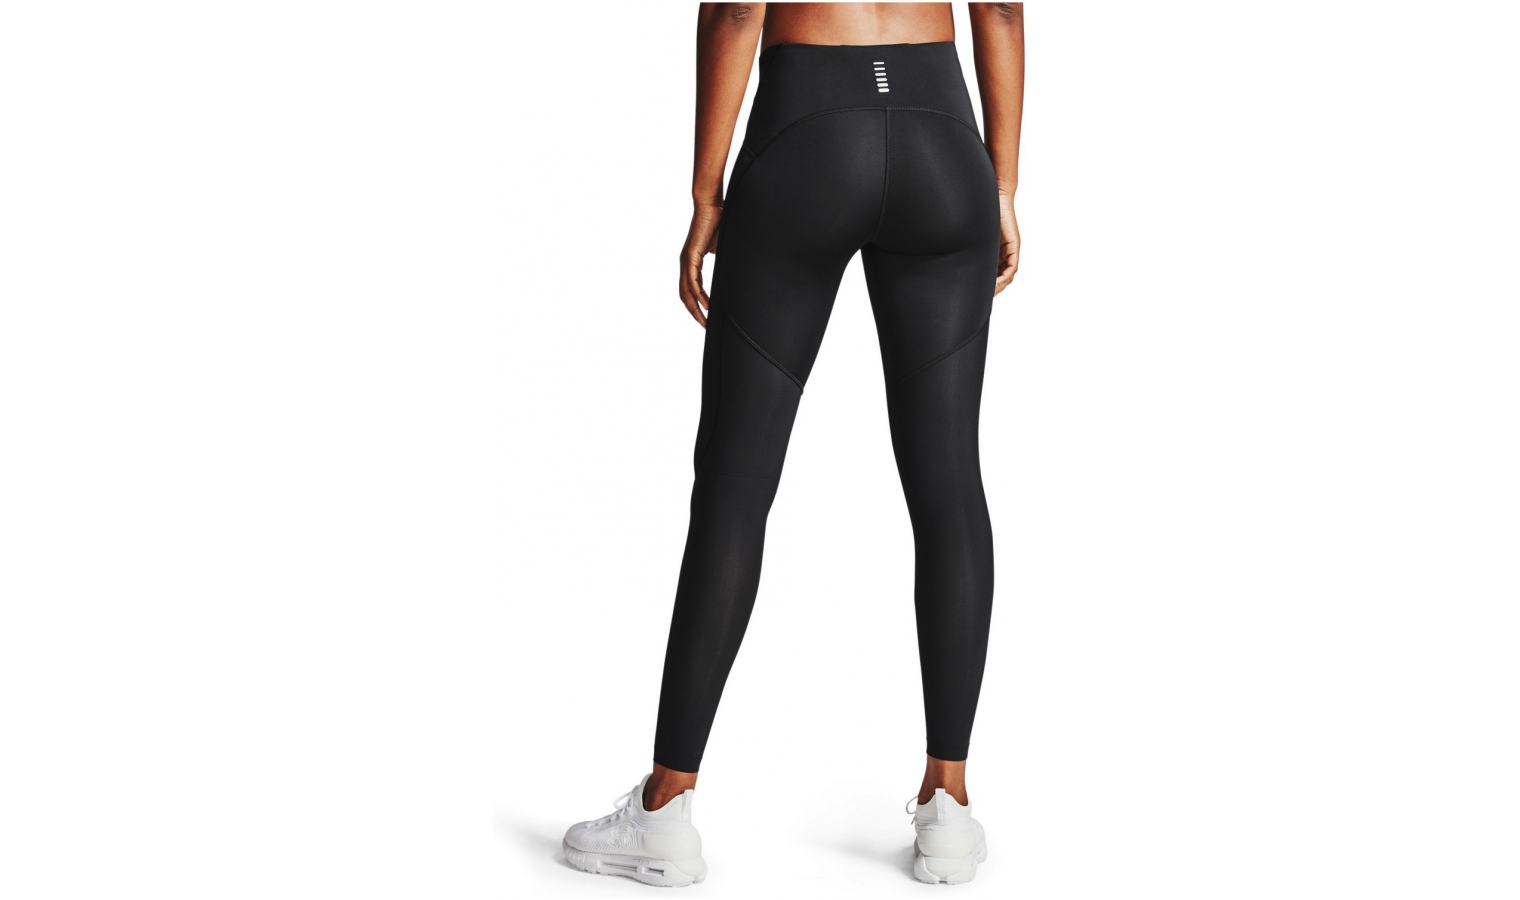 Leggings Under Armour UA Fly Fast 2.0 HG Tight 